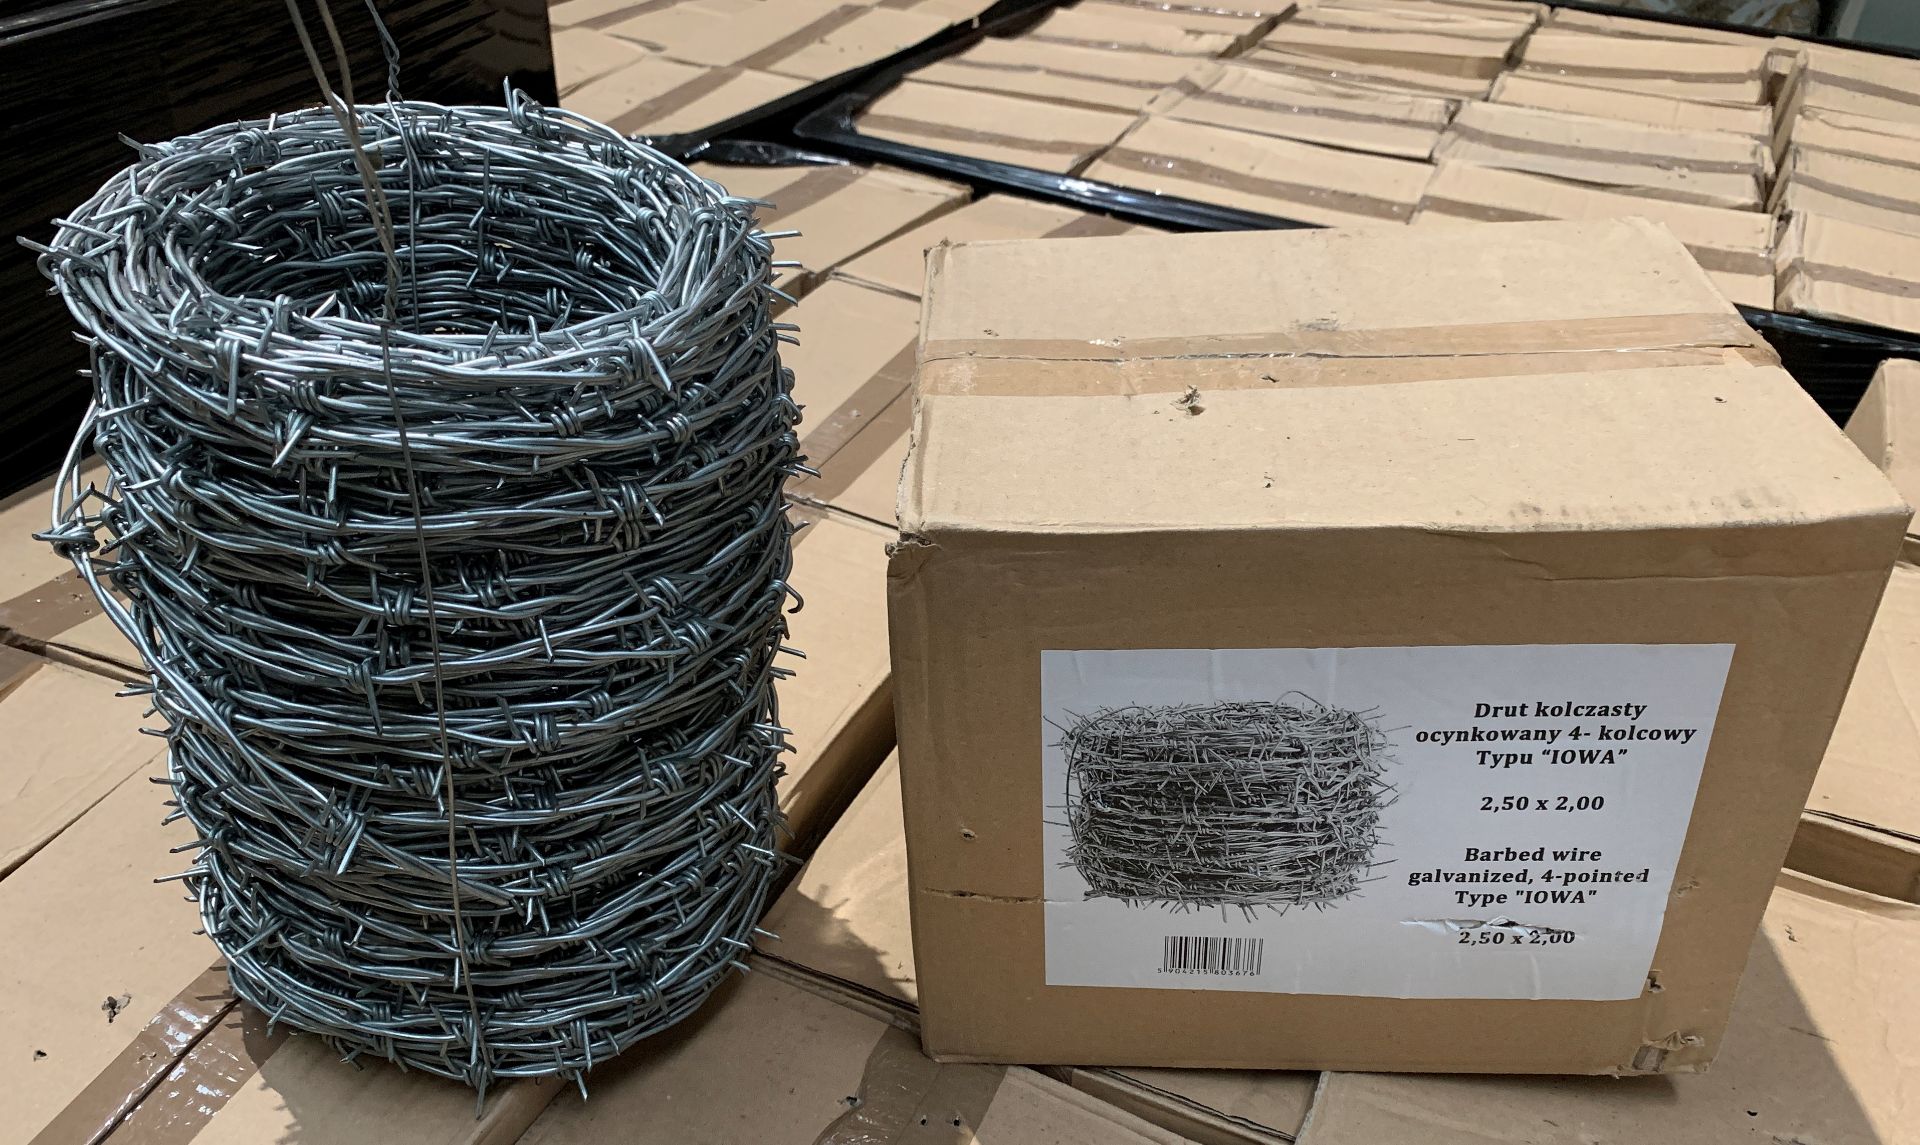 20 x boxes of barbed wire - each box containing a 2,50 x 2,